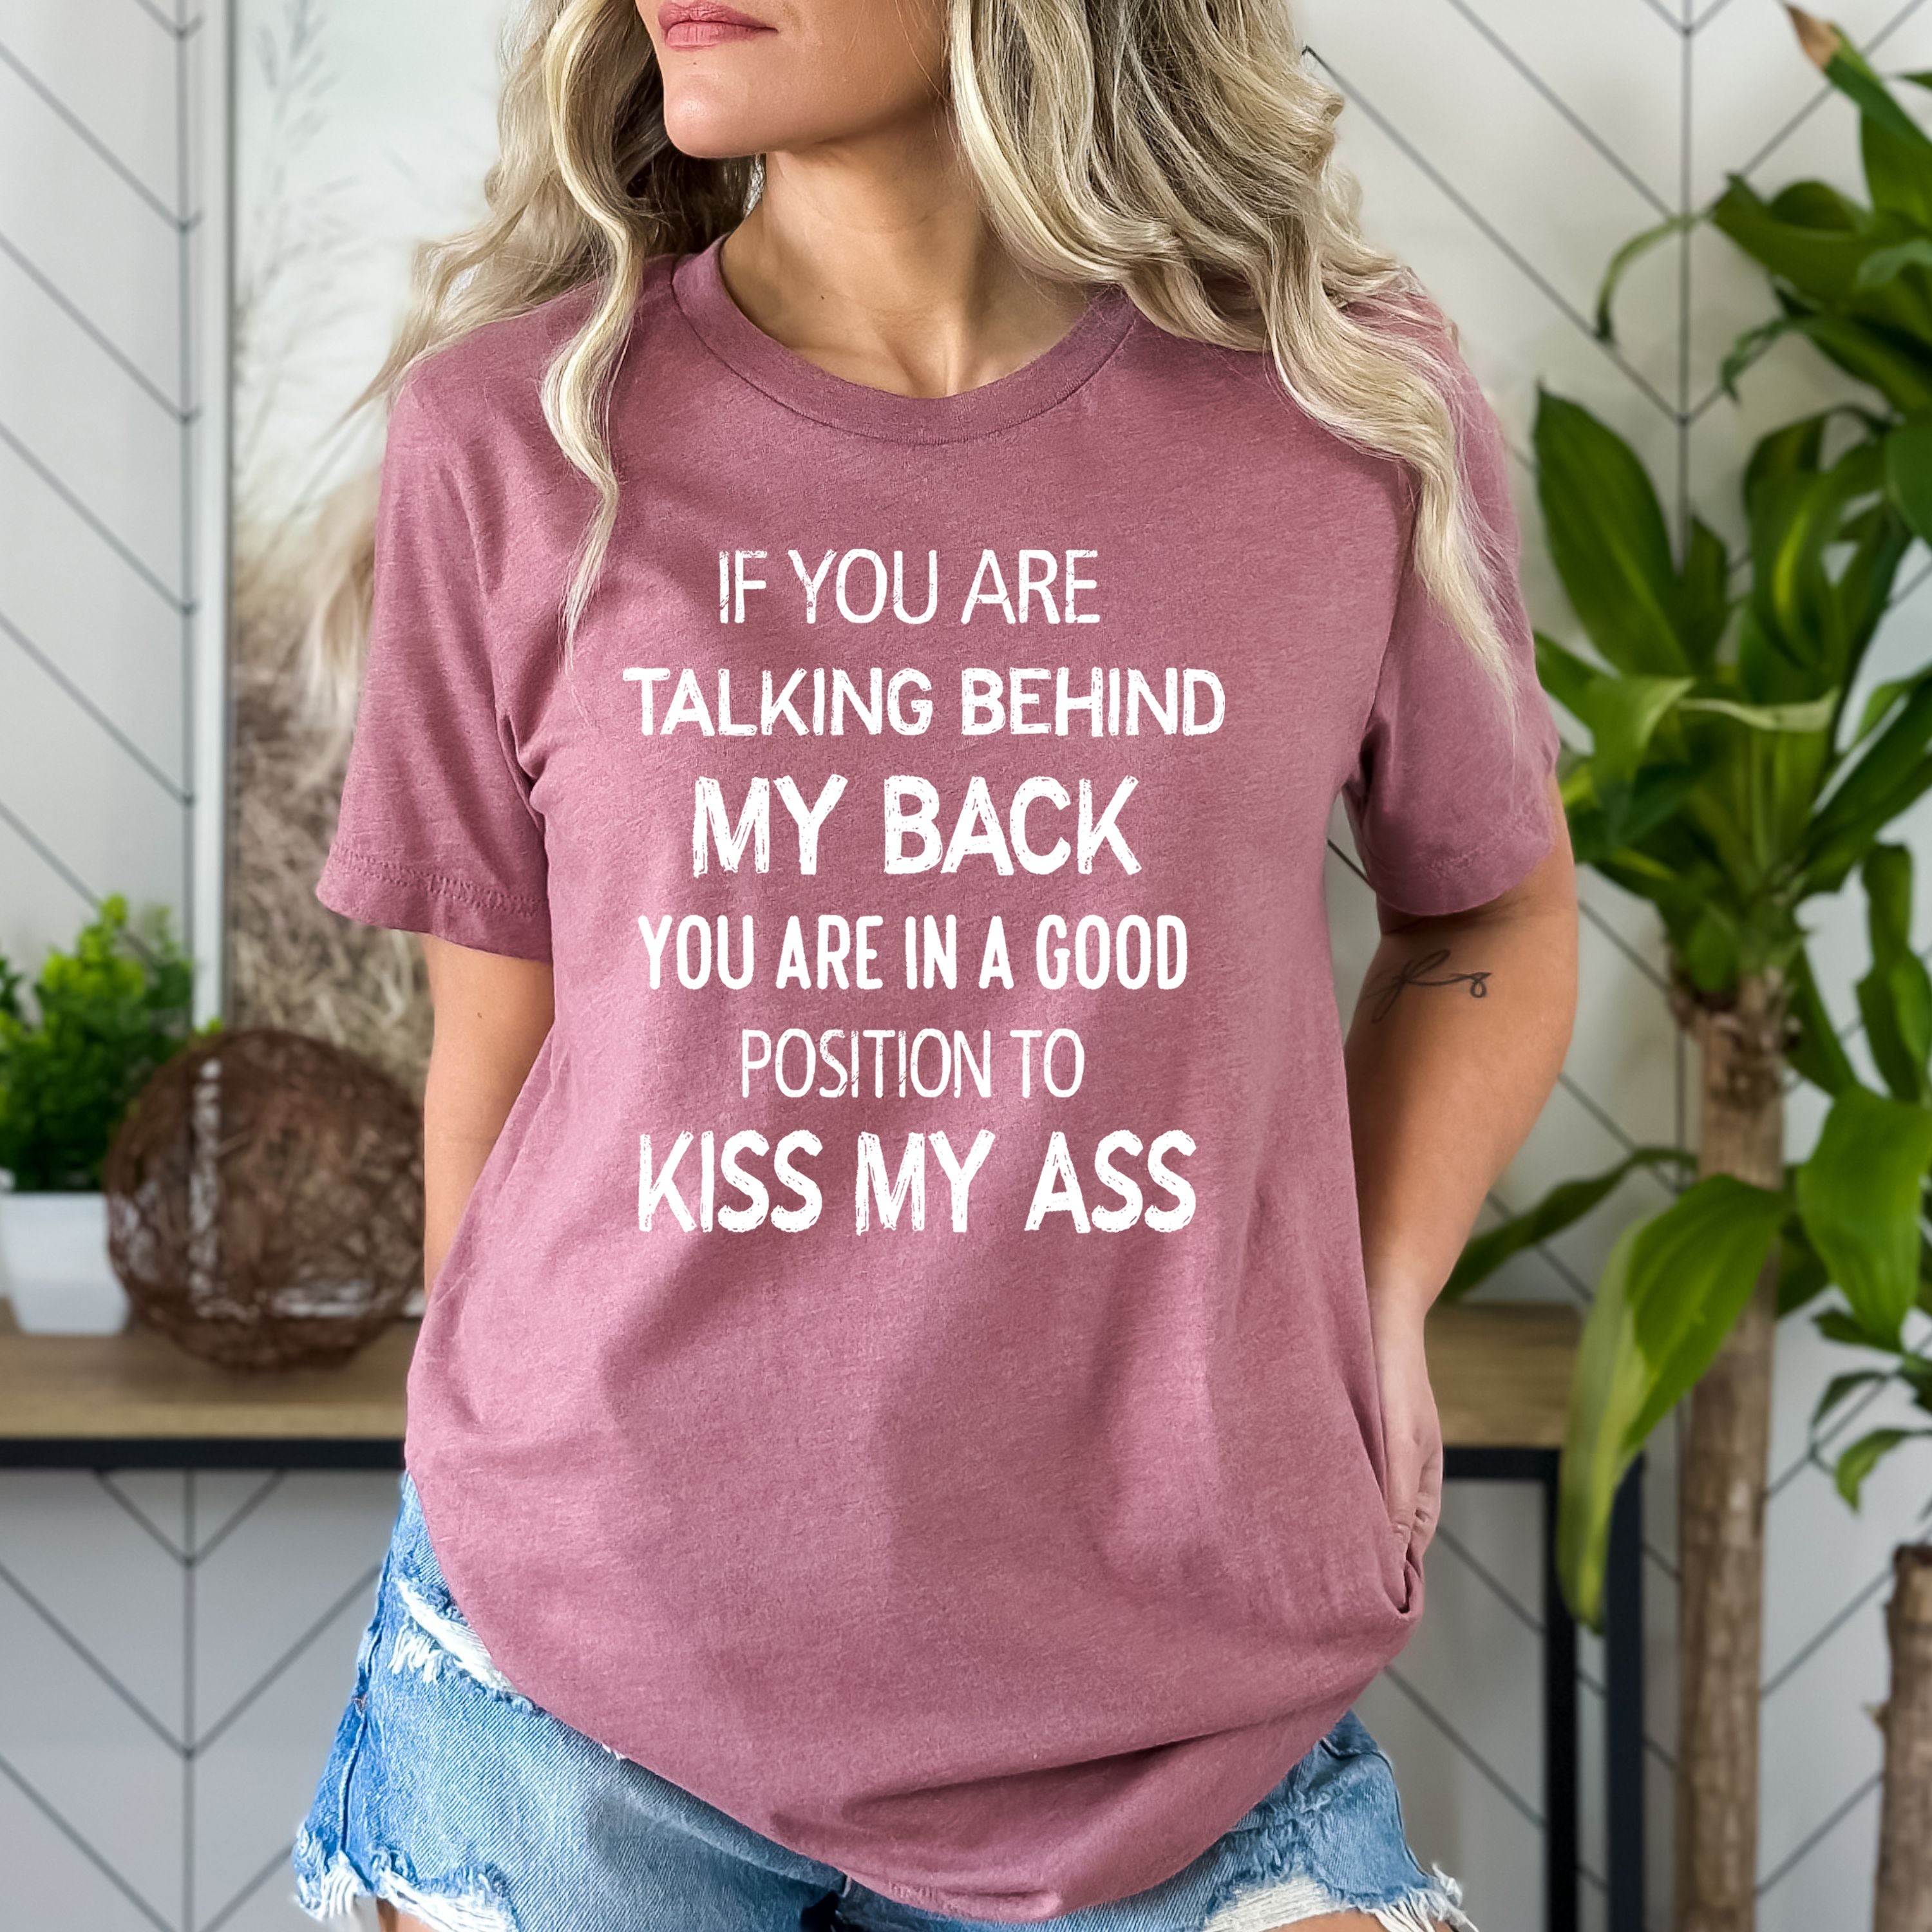 You Are Talking Behind My Behind - Bella canvas